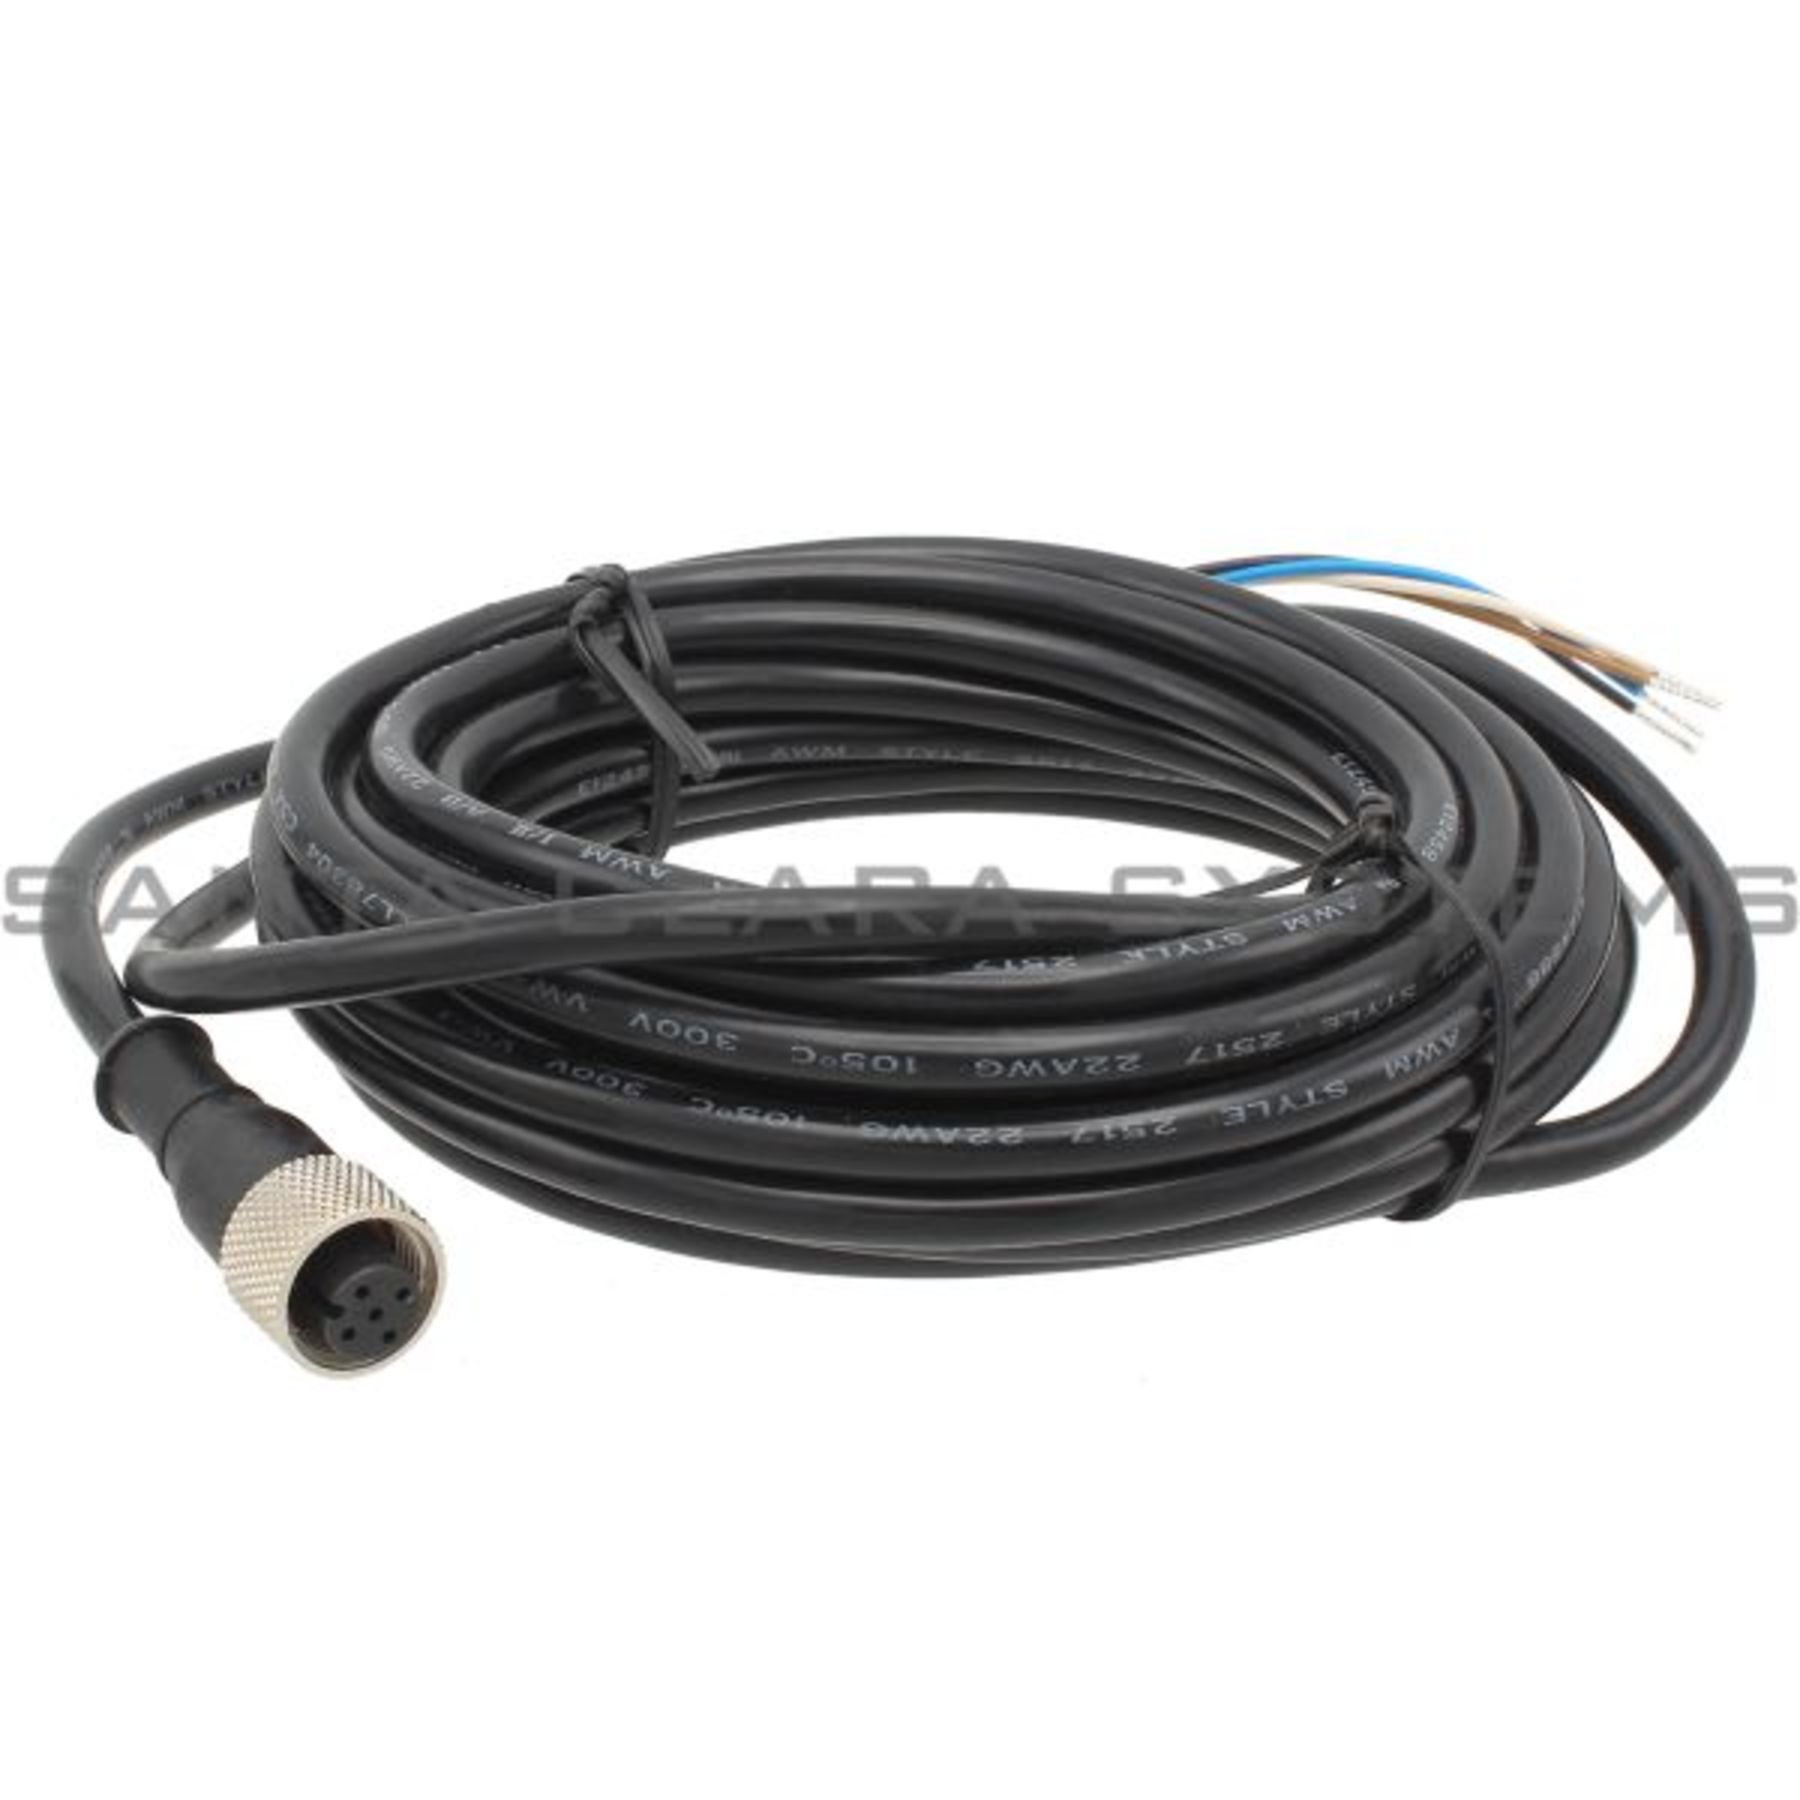 26848 Banner MQDC-415 RA Euro Quick Disconnect Cordset Cable 4p 4 Pin M12 PVC 